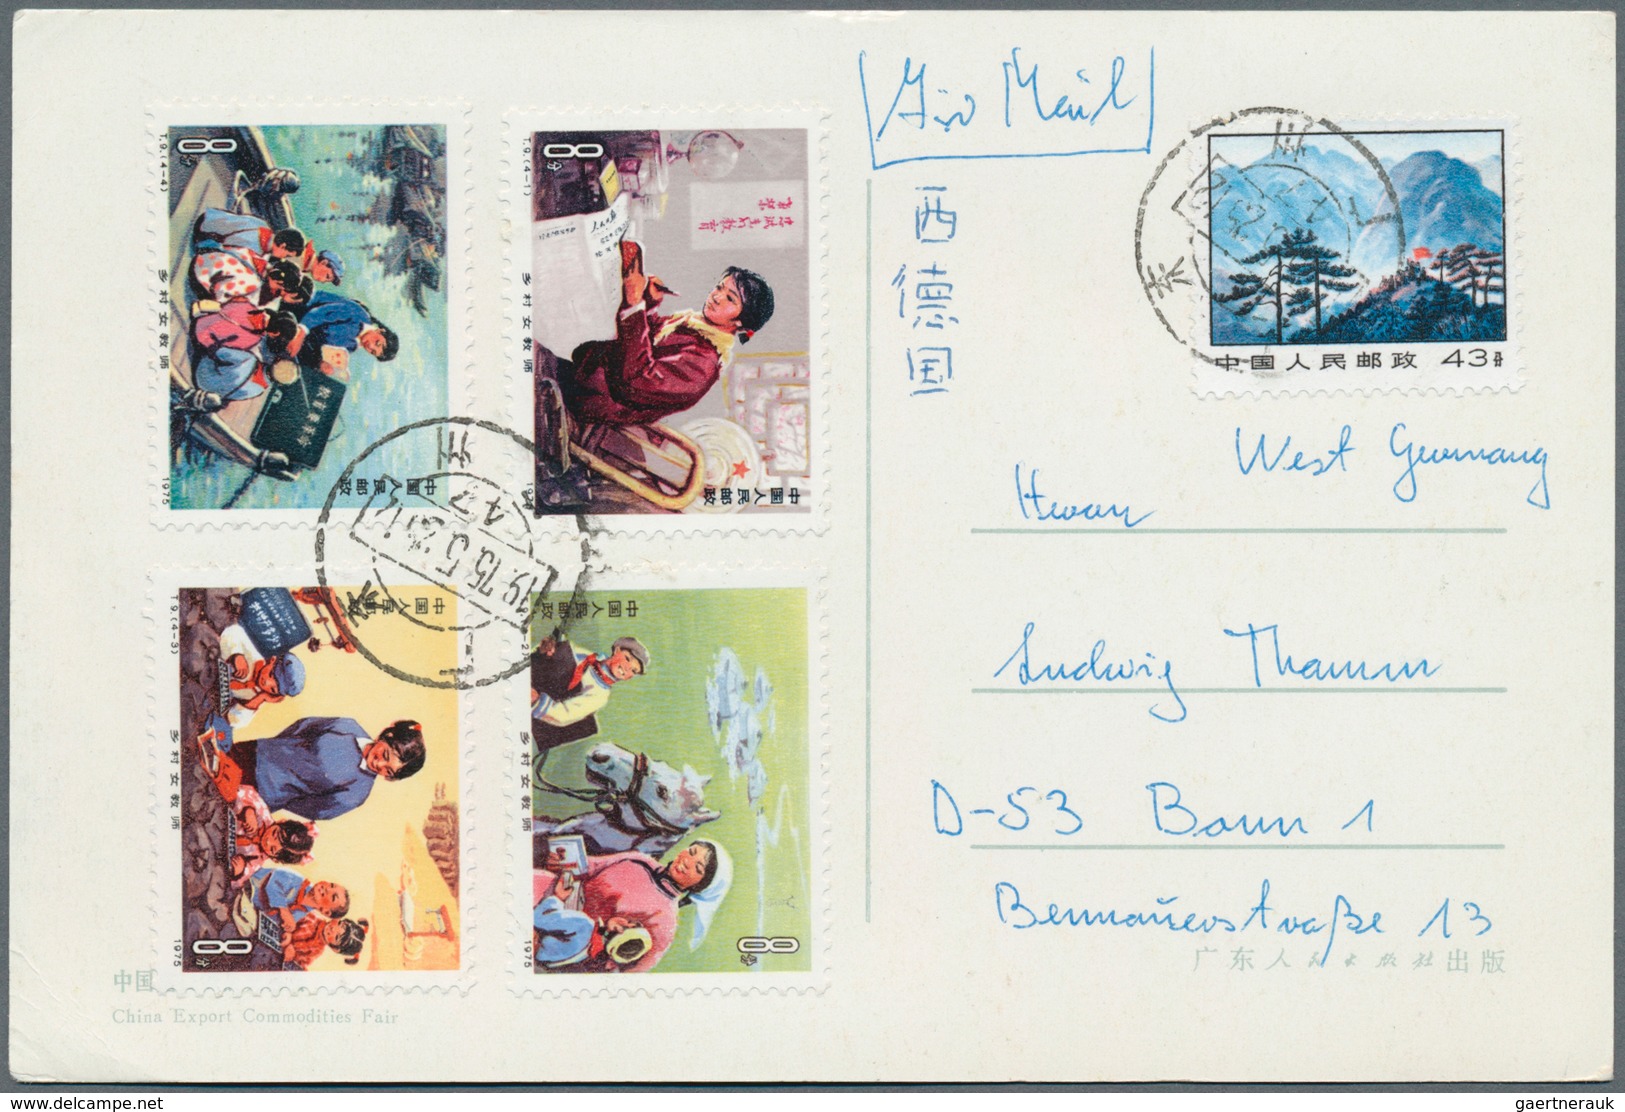 22453 China - Volksrepublik: 1965/87, covers (14), used ppc (2) to West Germany, inc. several with complet